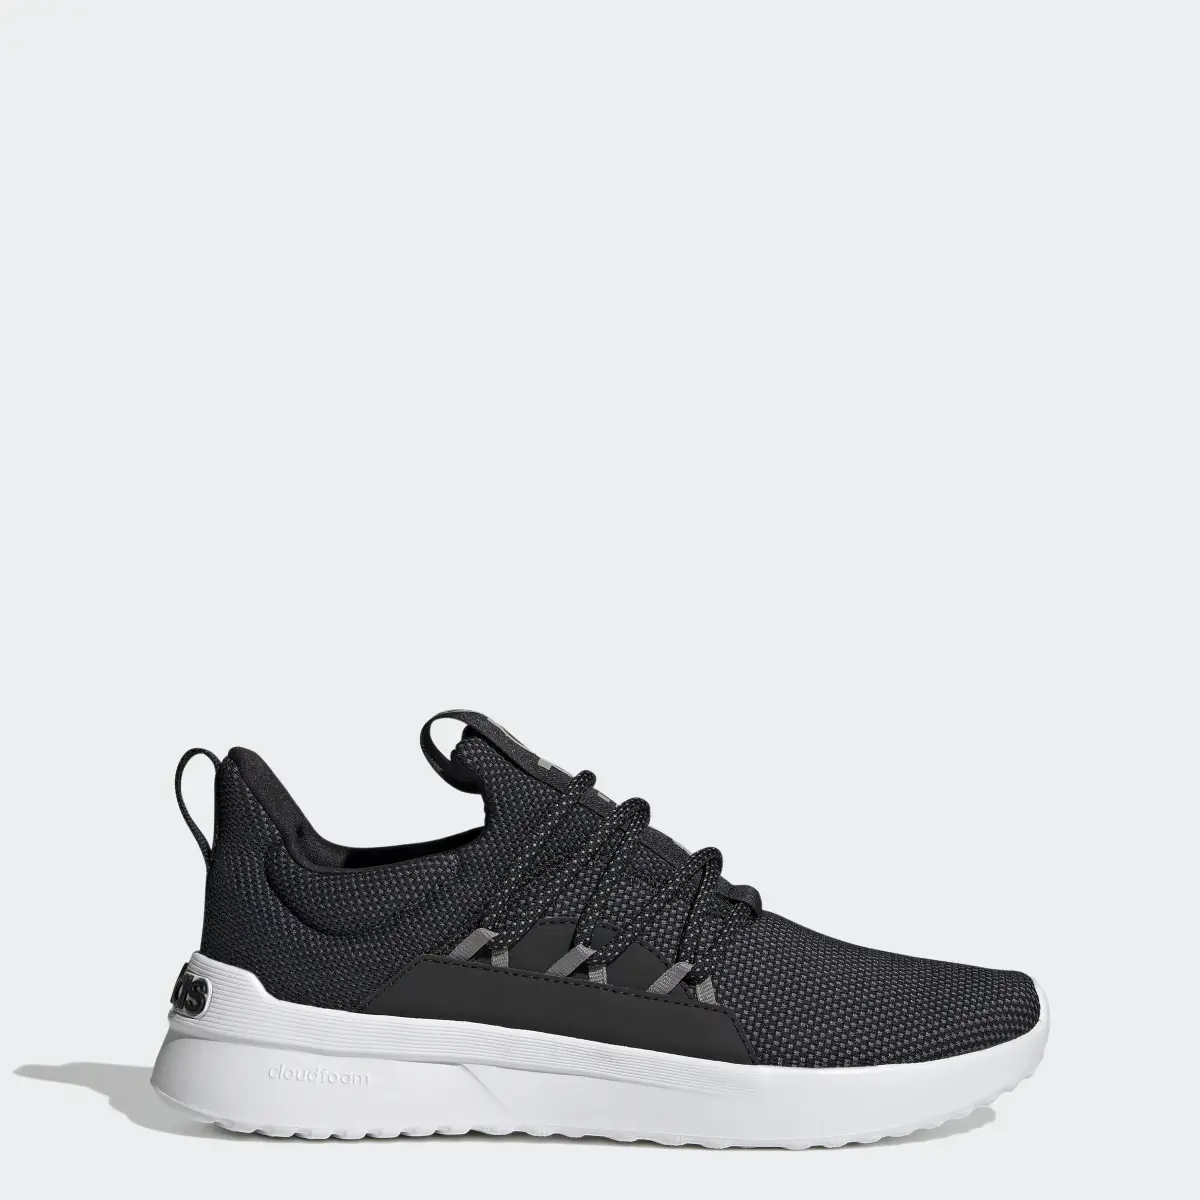 Adidas Lite Racer Adapt 5.0 Shoes. 1